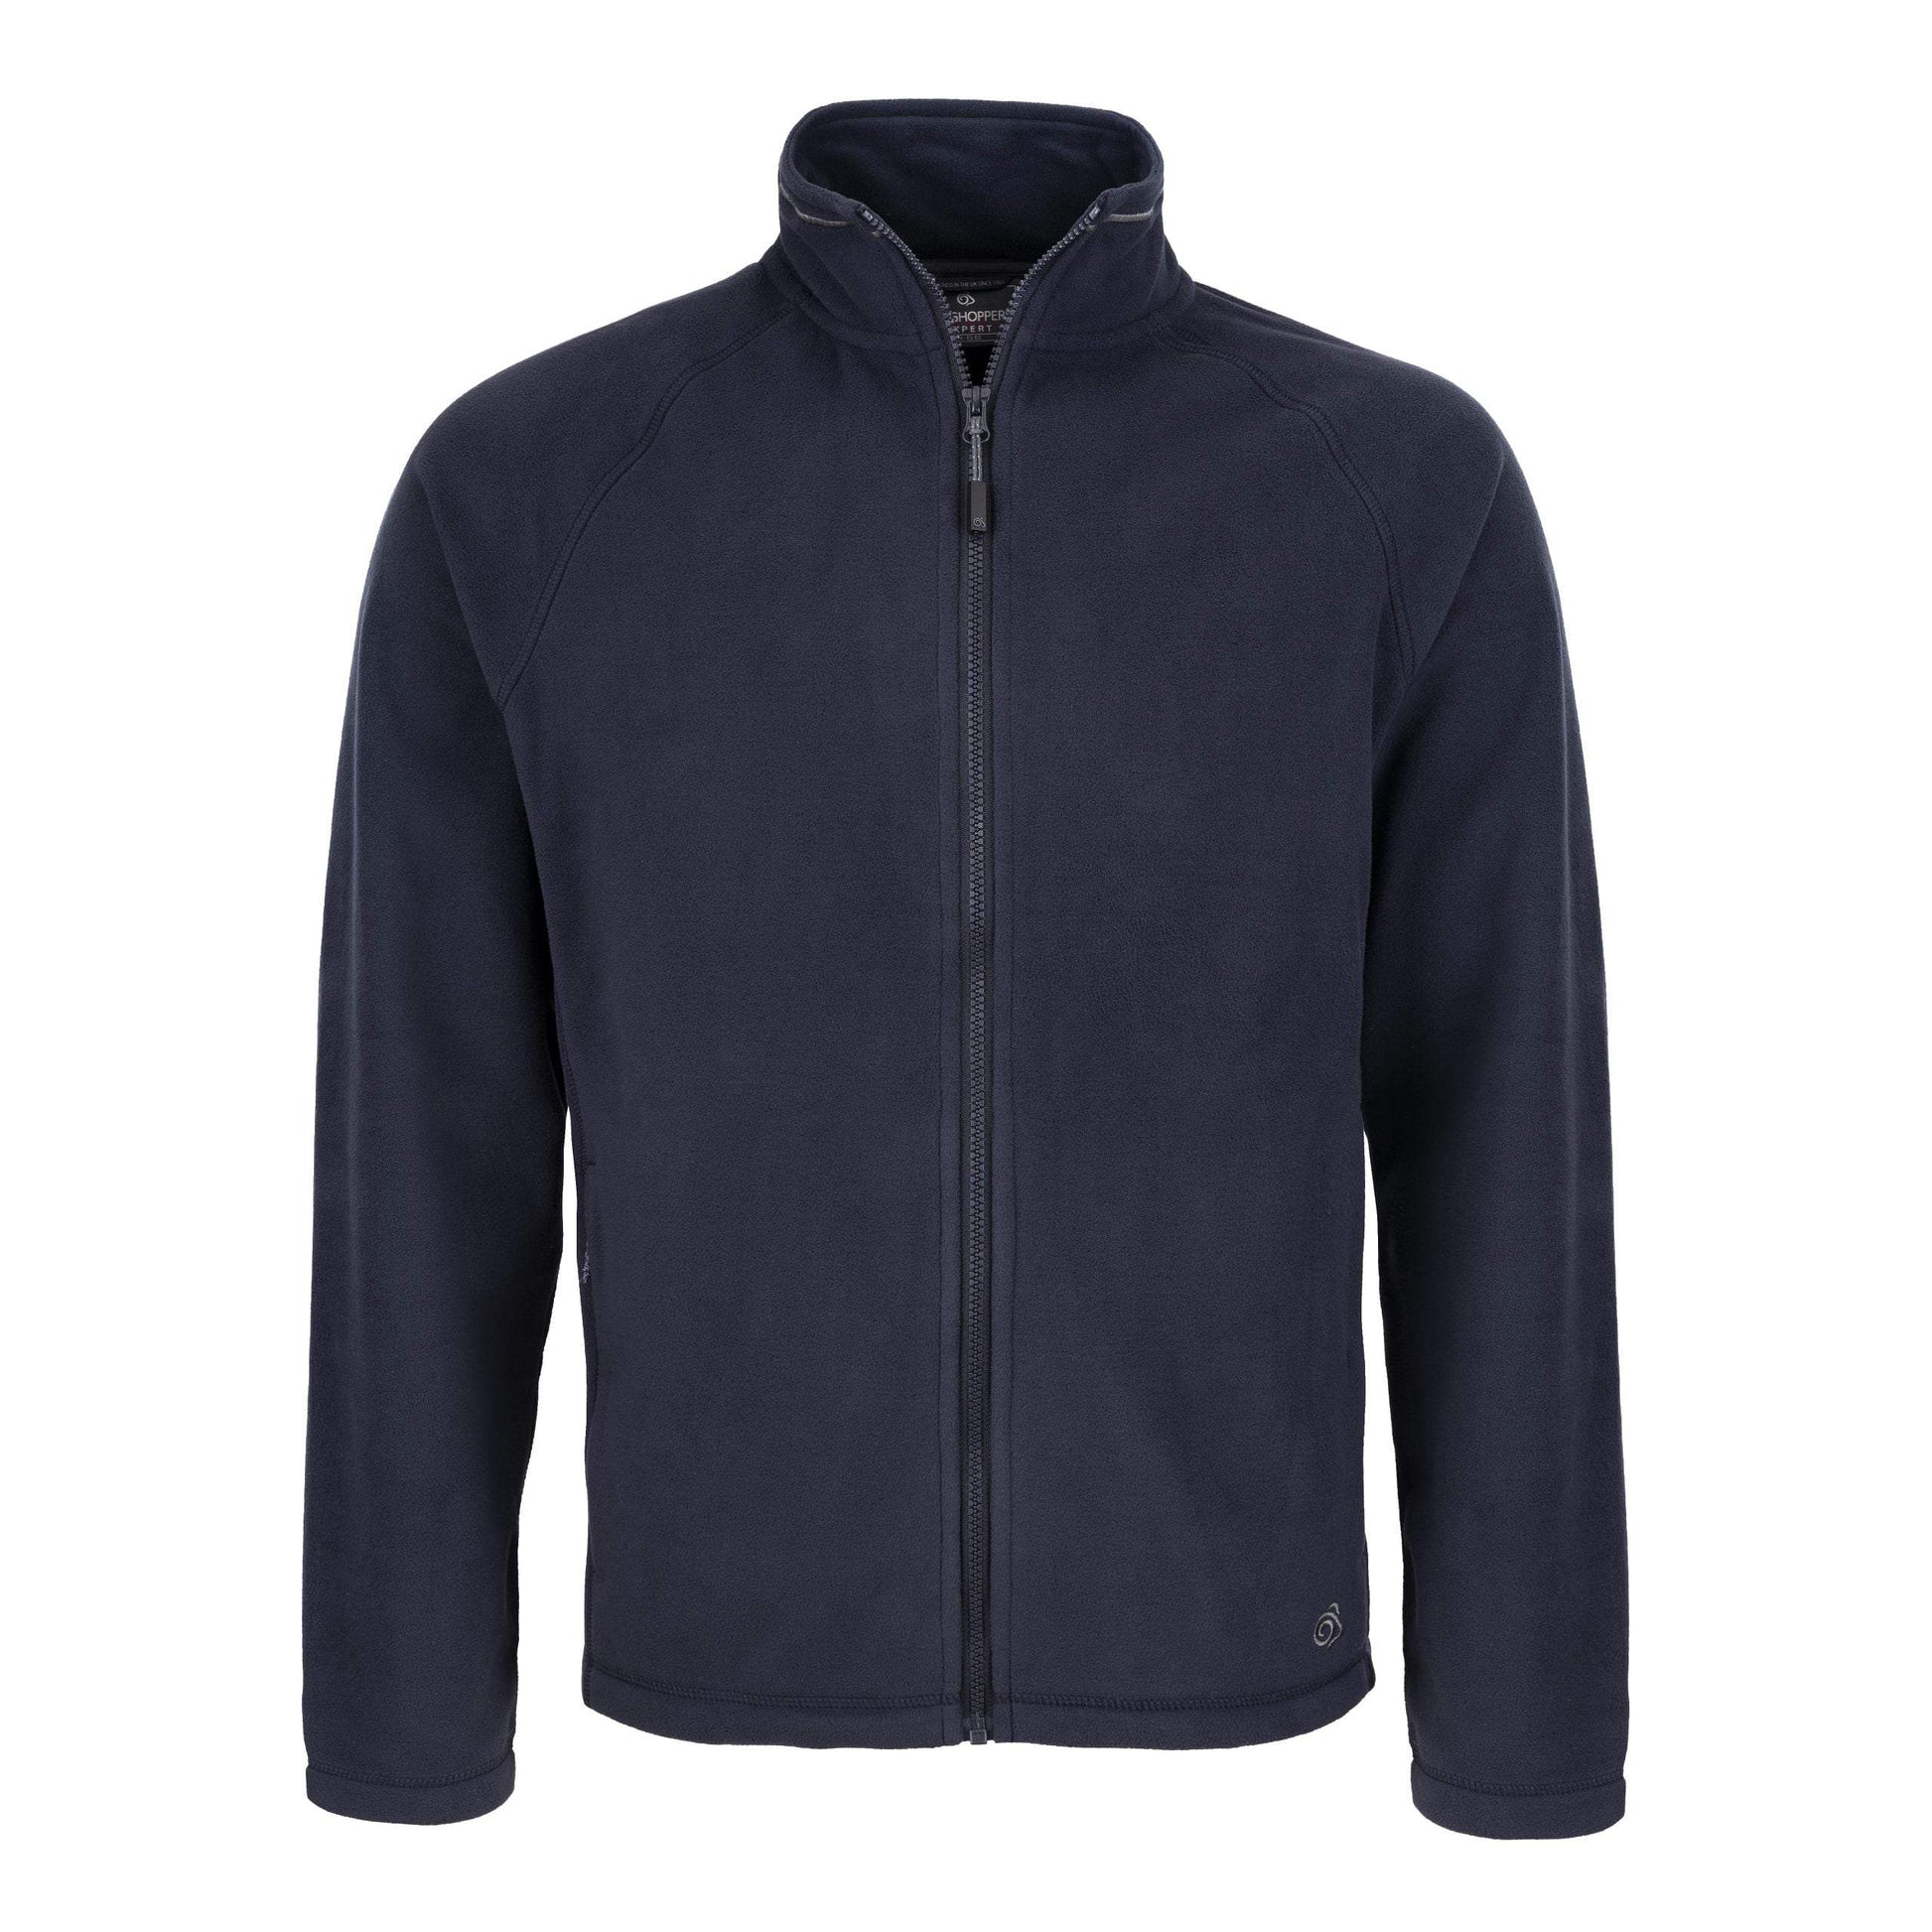 Men’s Expert Corey 200 Fleece Jacket by Craghoppers - Promotions Only Group Limited